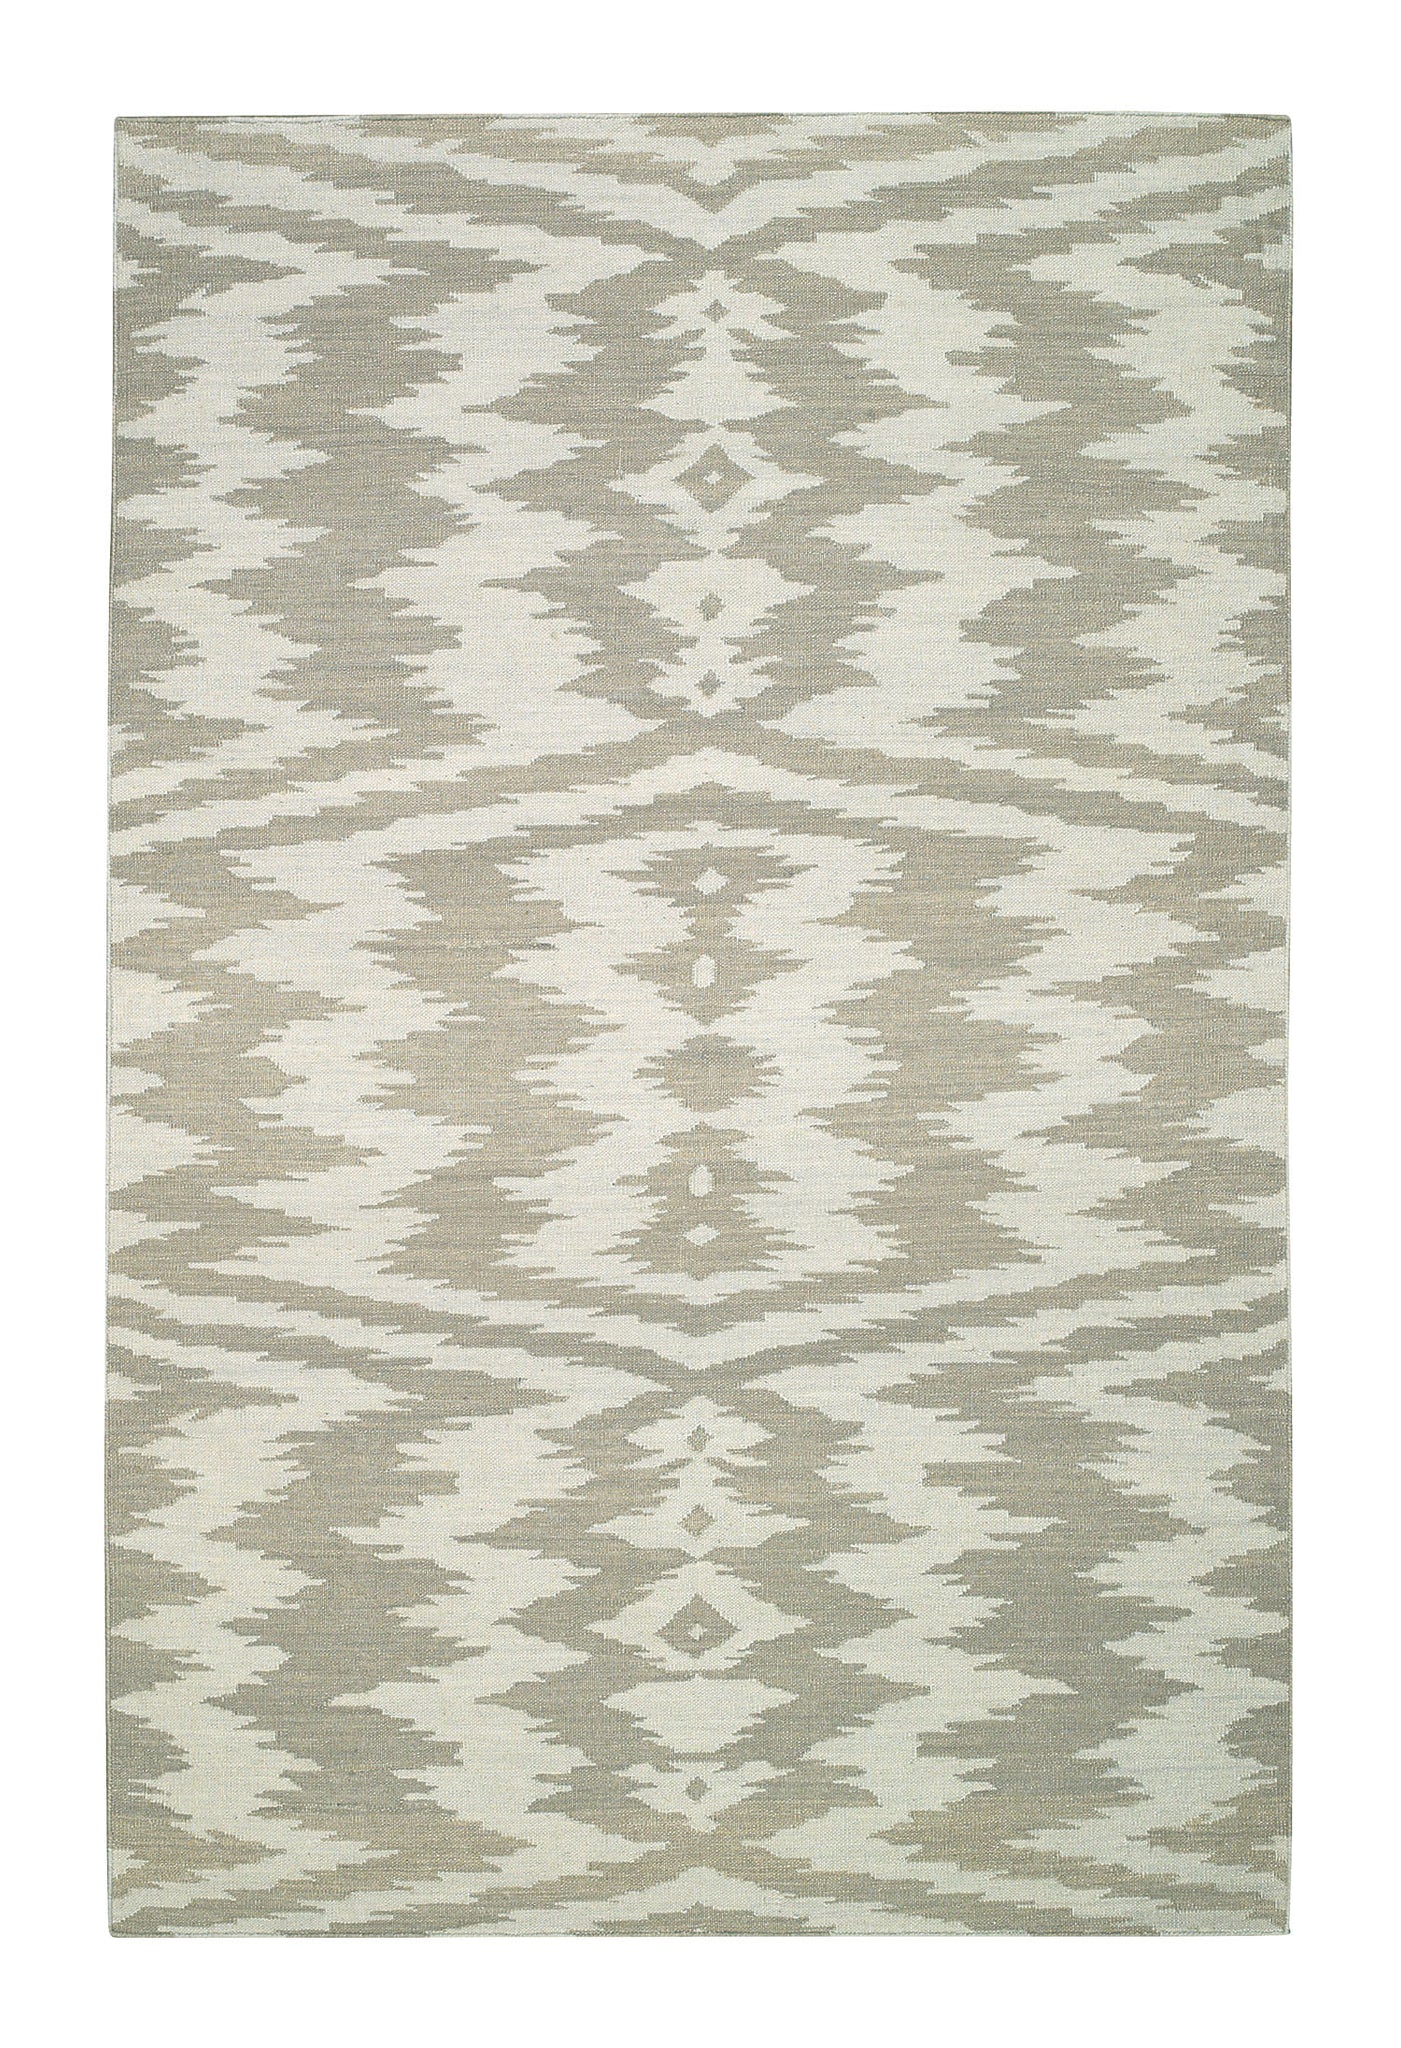 Capel Junction 3625 Beige 700 Area Rug by Genevieve Gorder main image